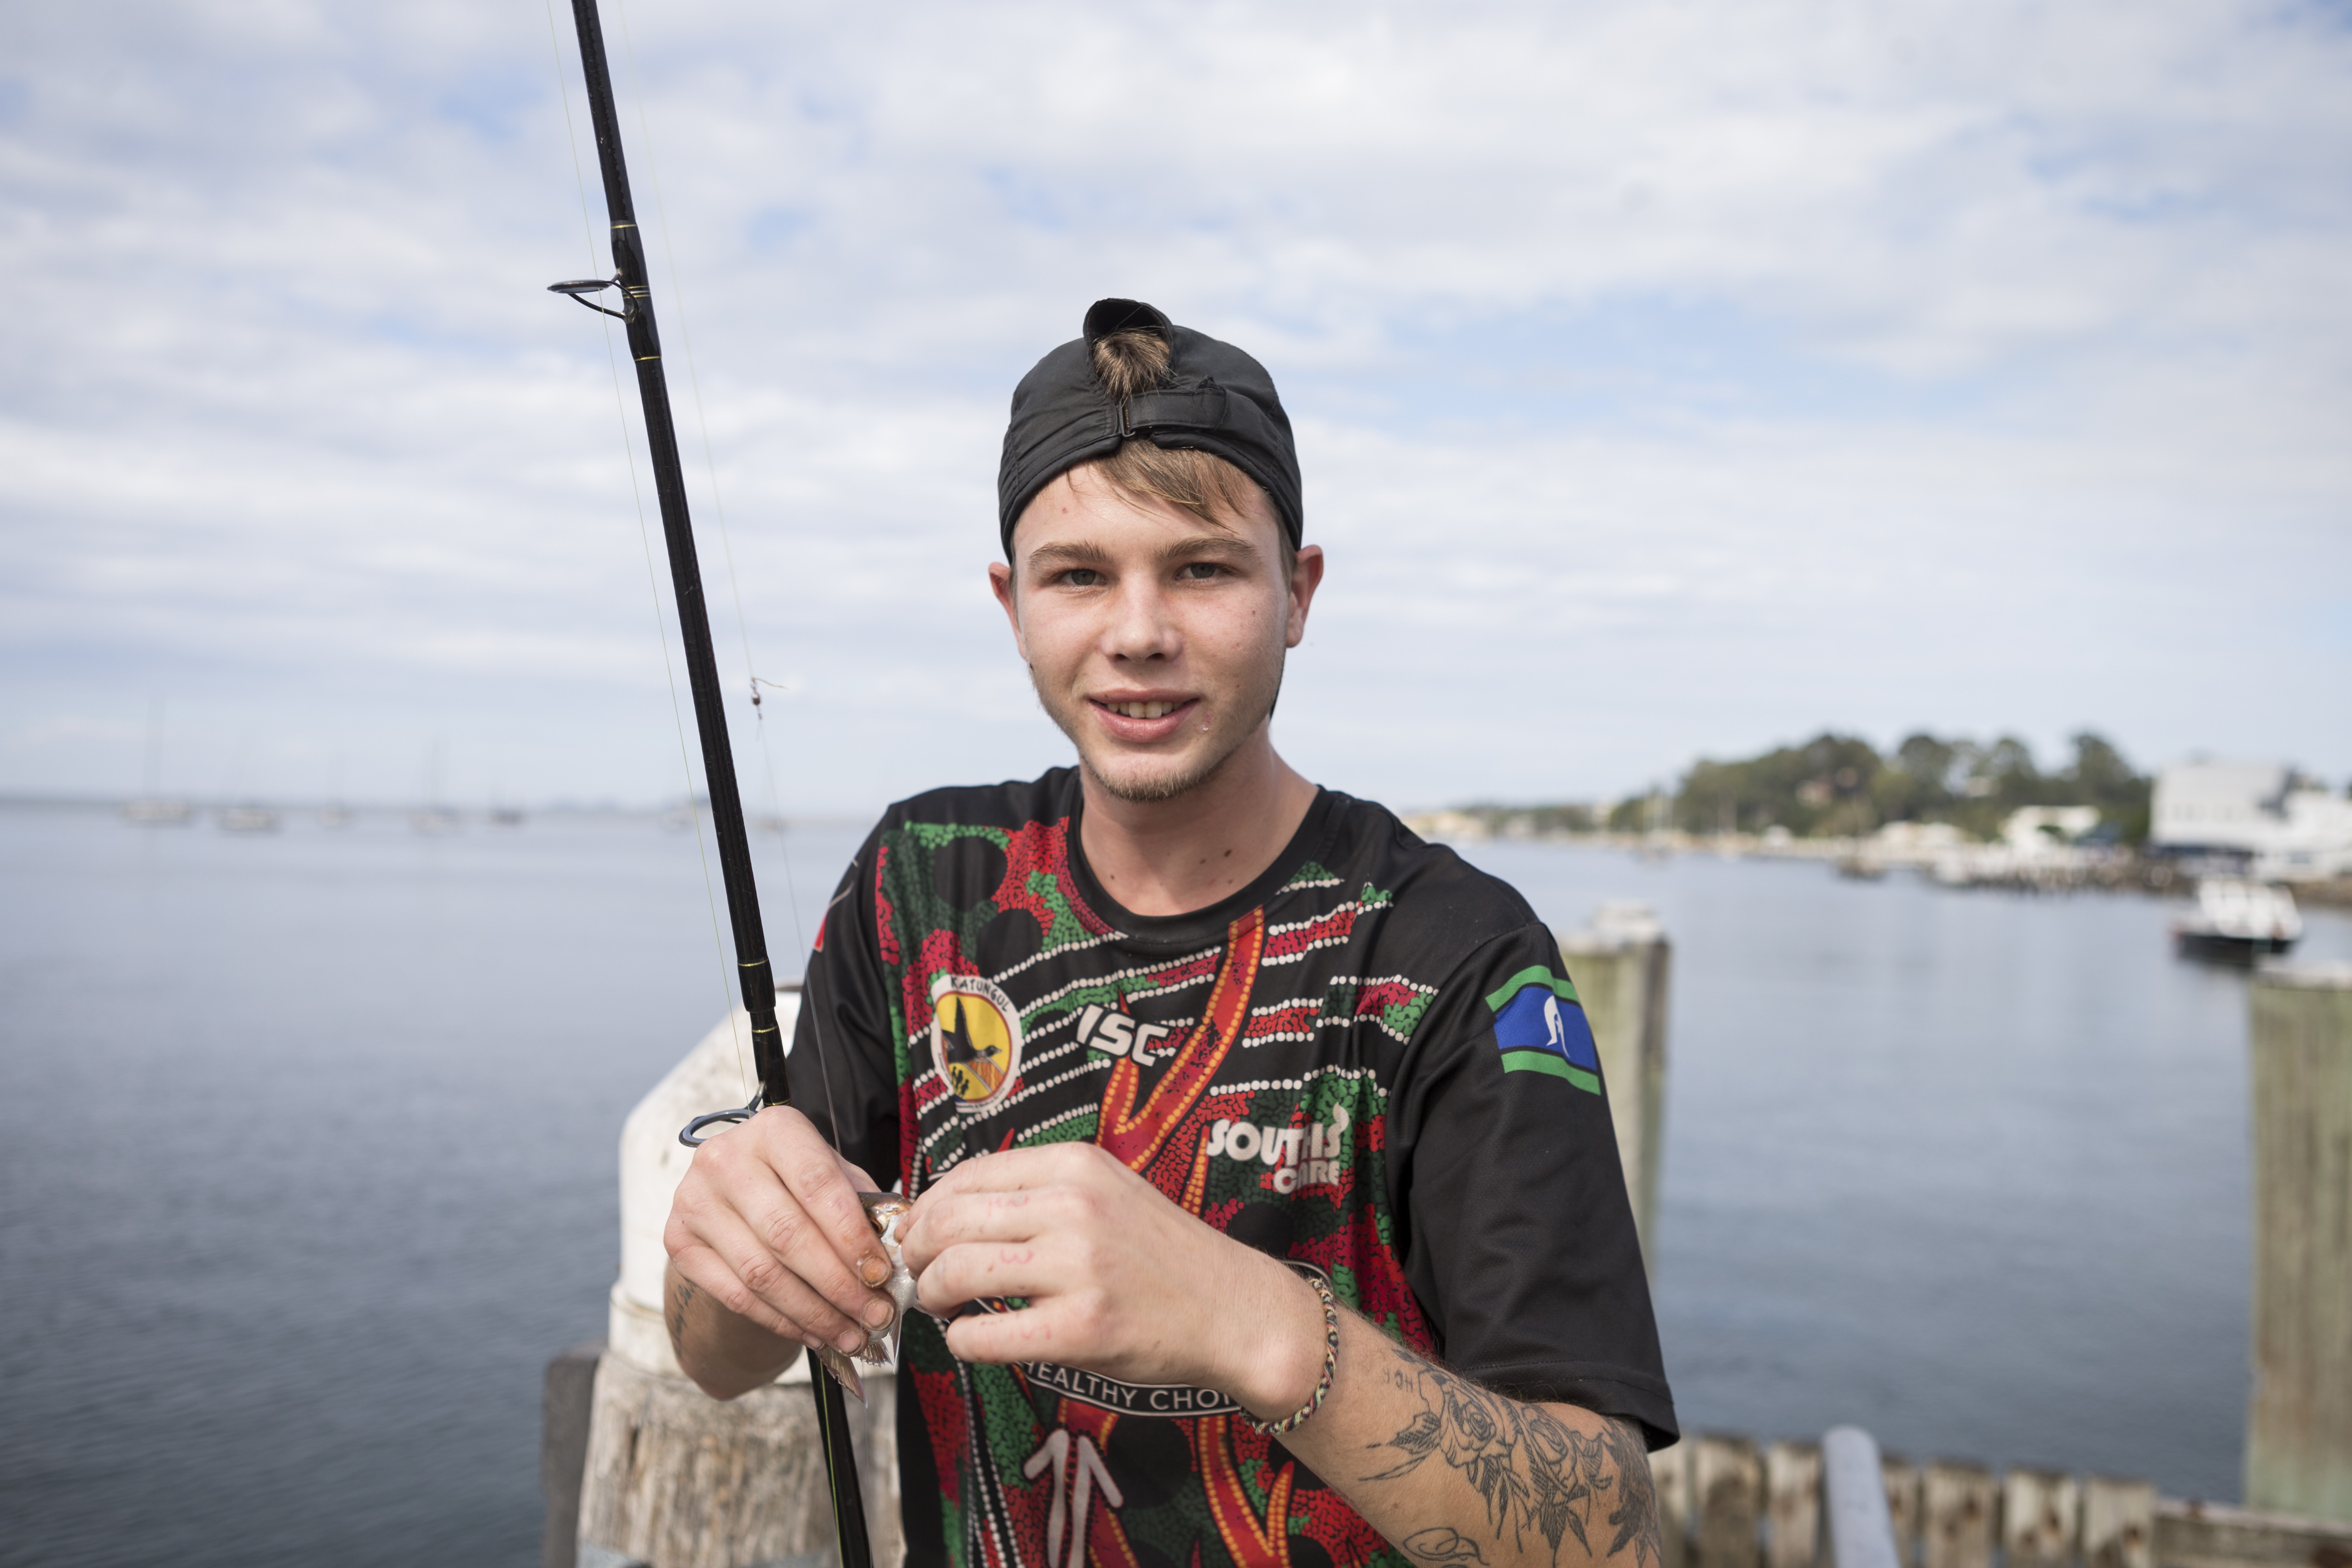 Batemans Bay voters 'fish' for clarity